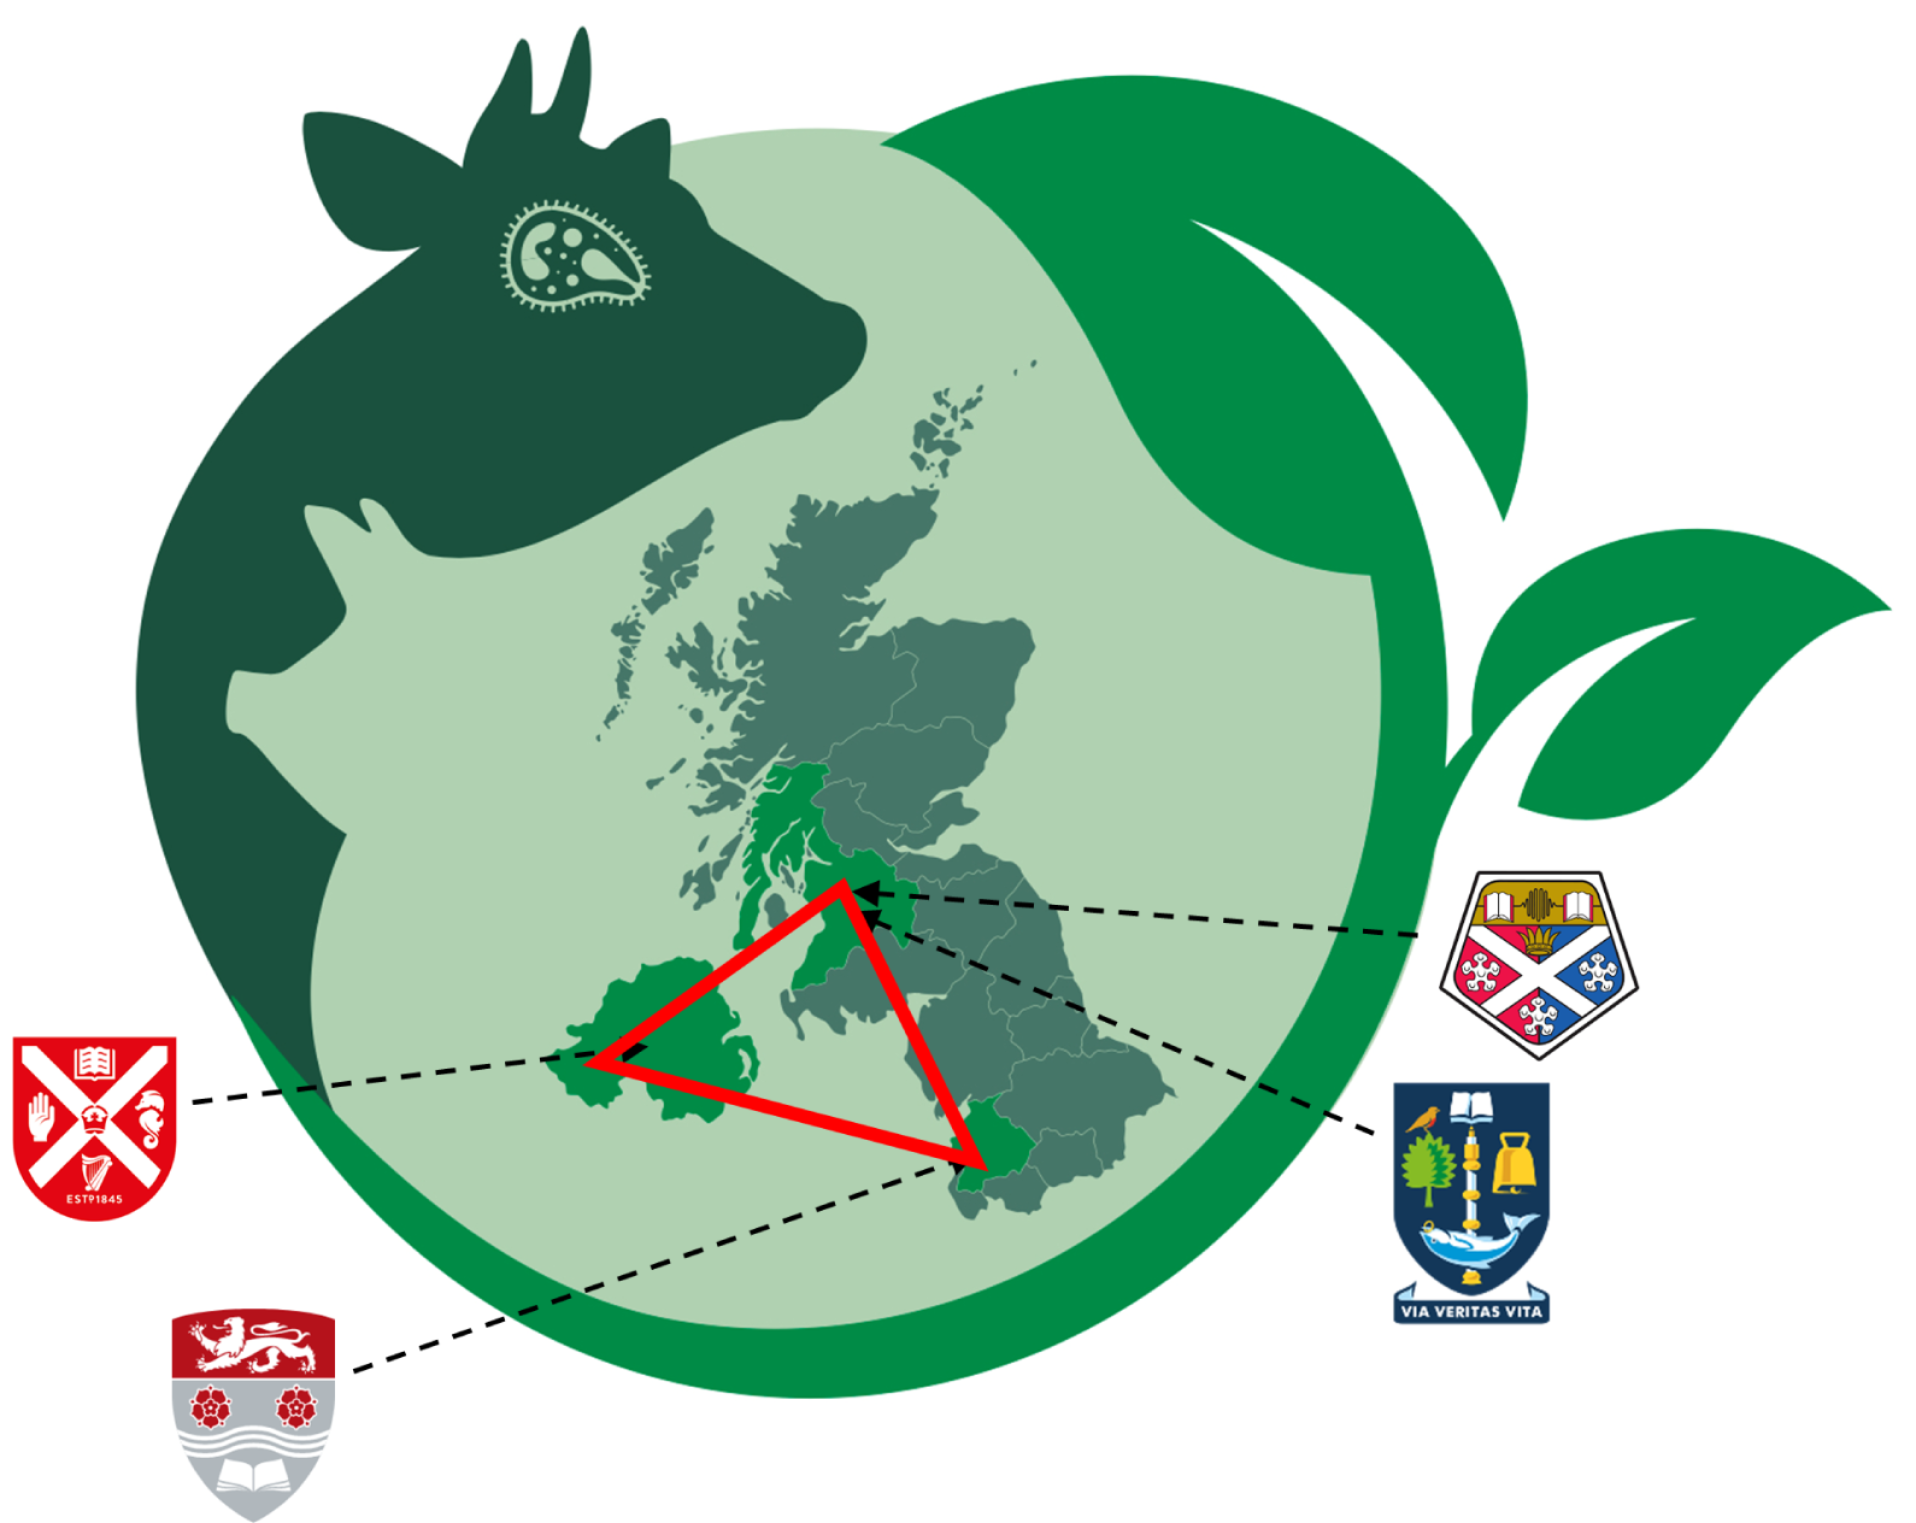 NorthWest Bio logo with a map of the UK and each of the partnership University Crests pointing to their designated locations.